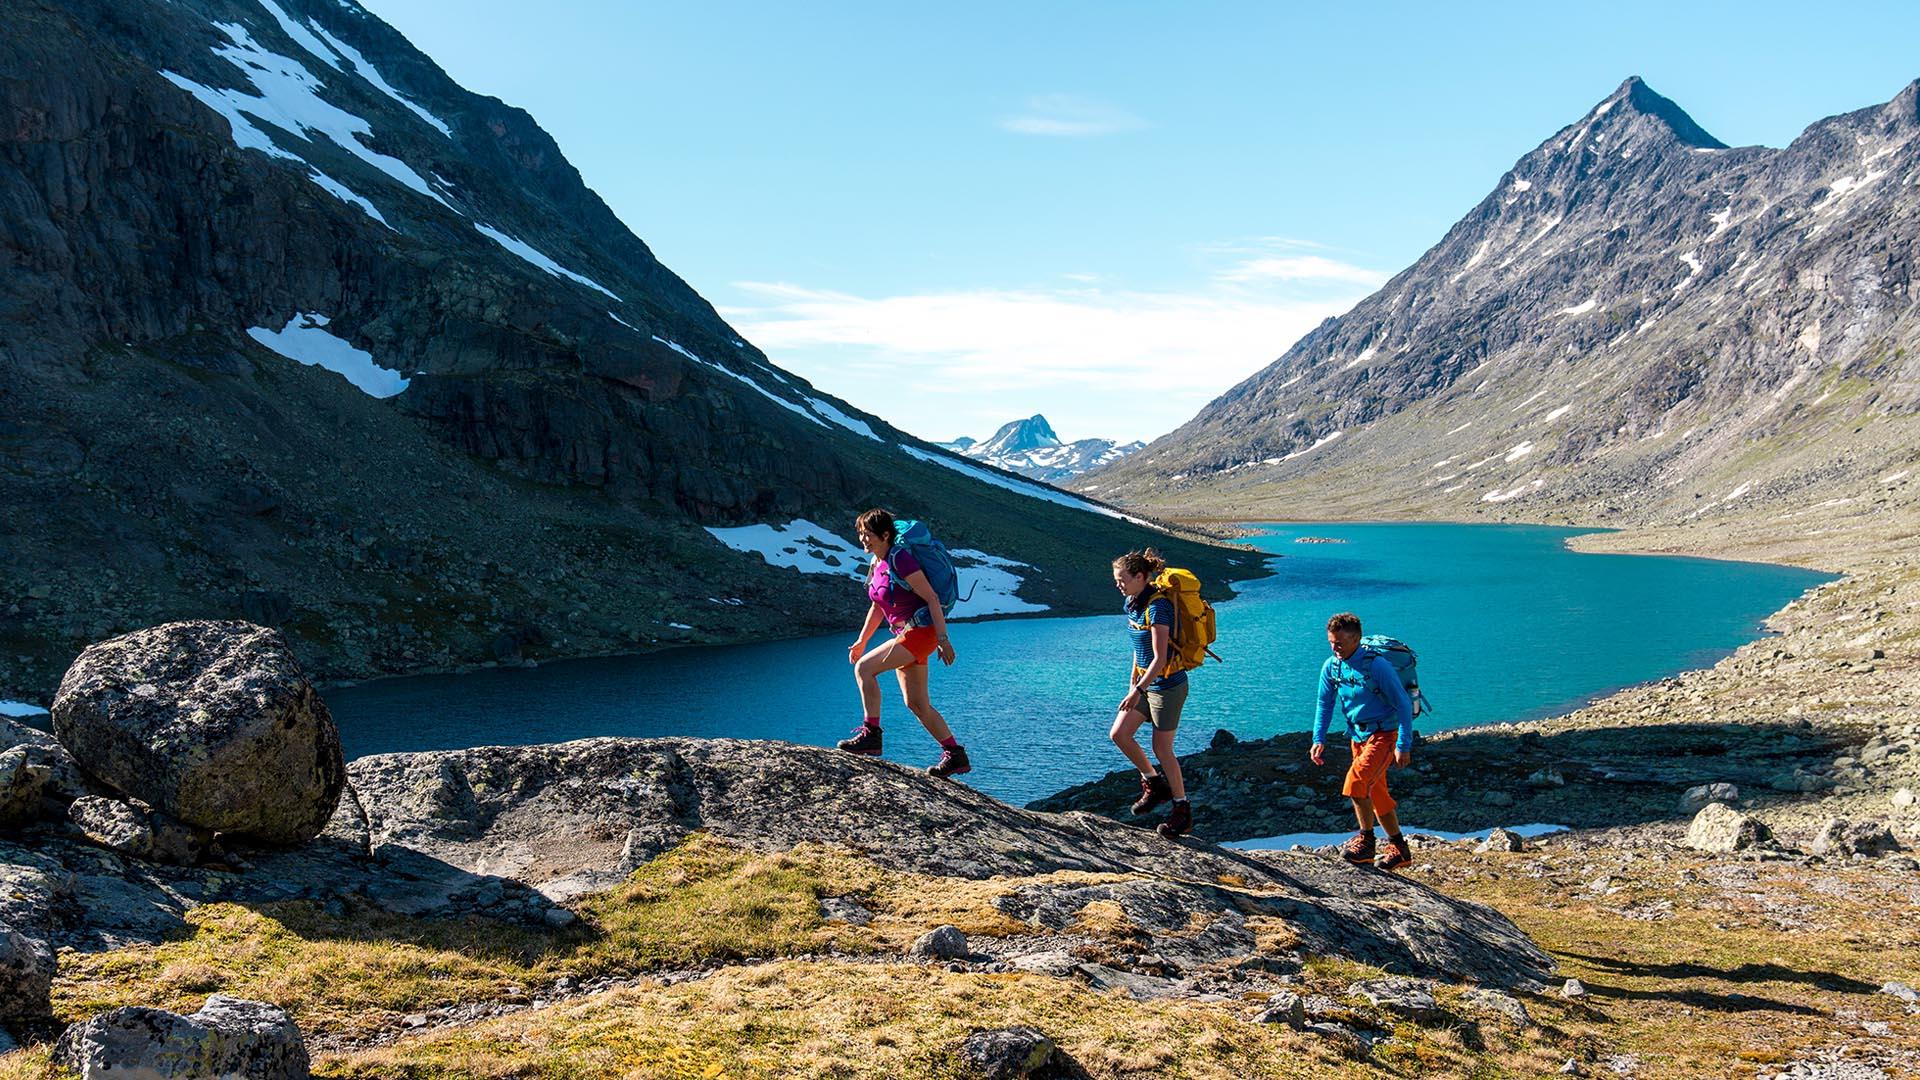 Three hikers in summer clothes with backpacks in a valley in barren high mountains with a lake and high, pointed peaks.